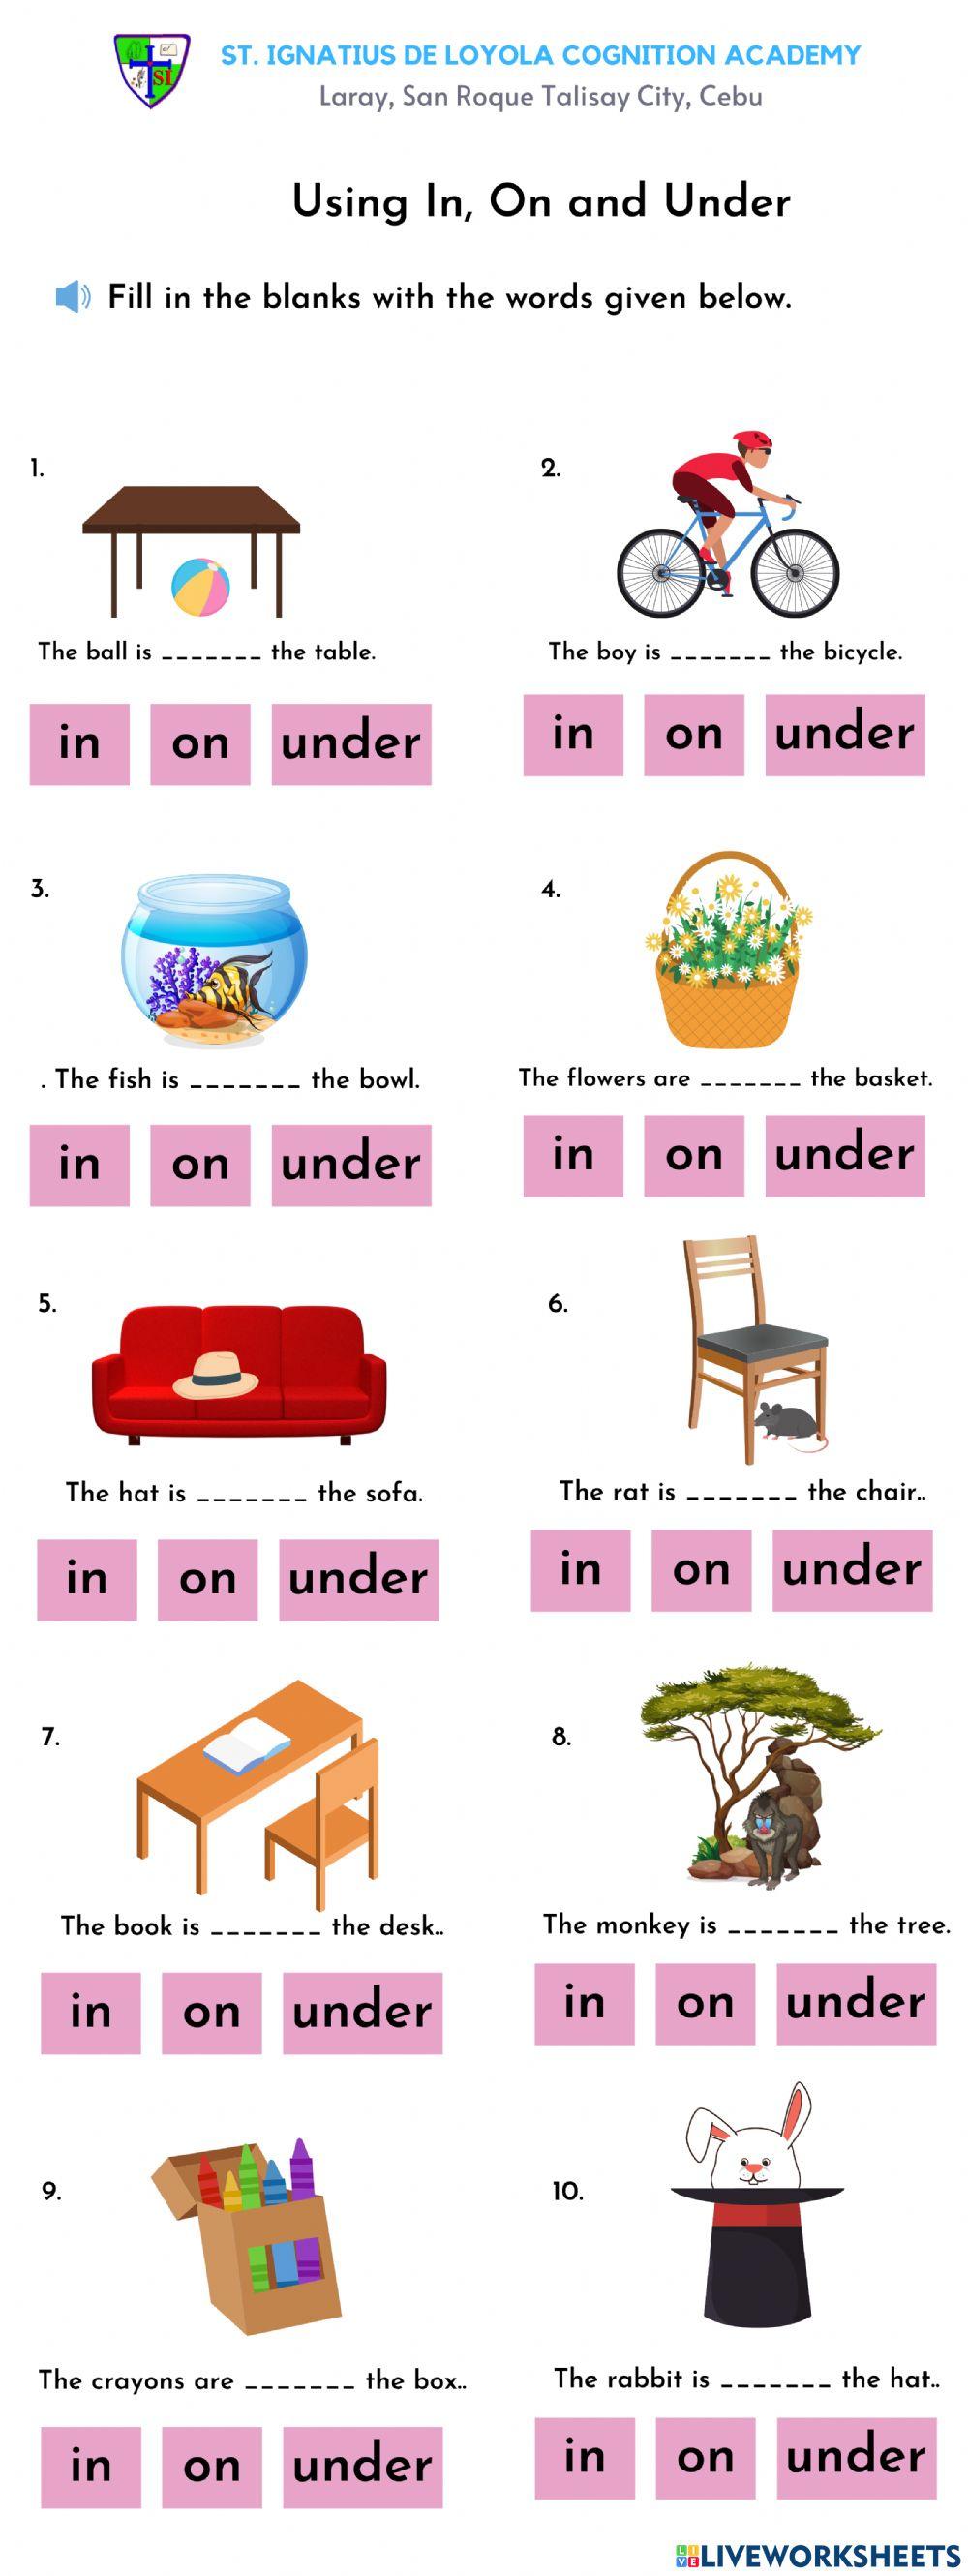 Using In, On and Under